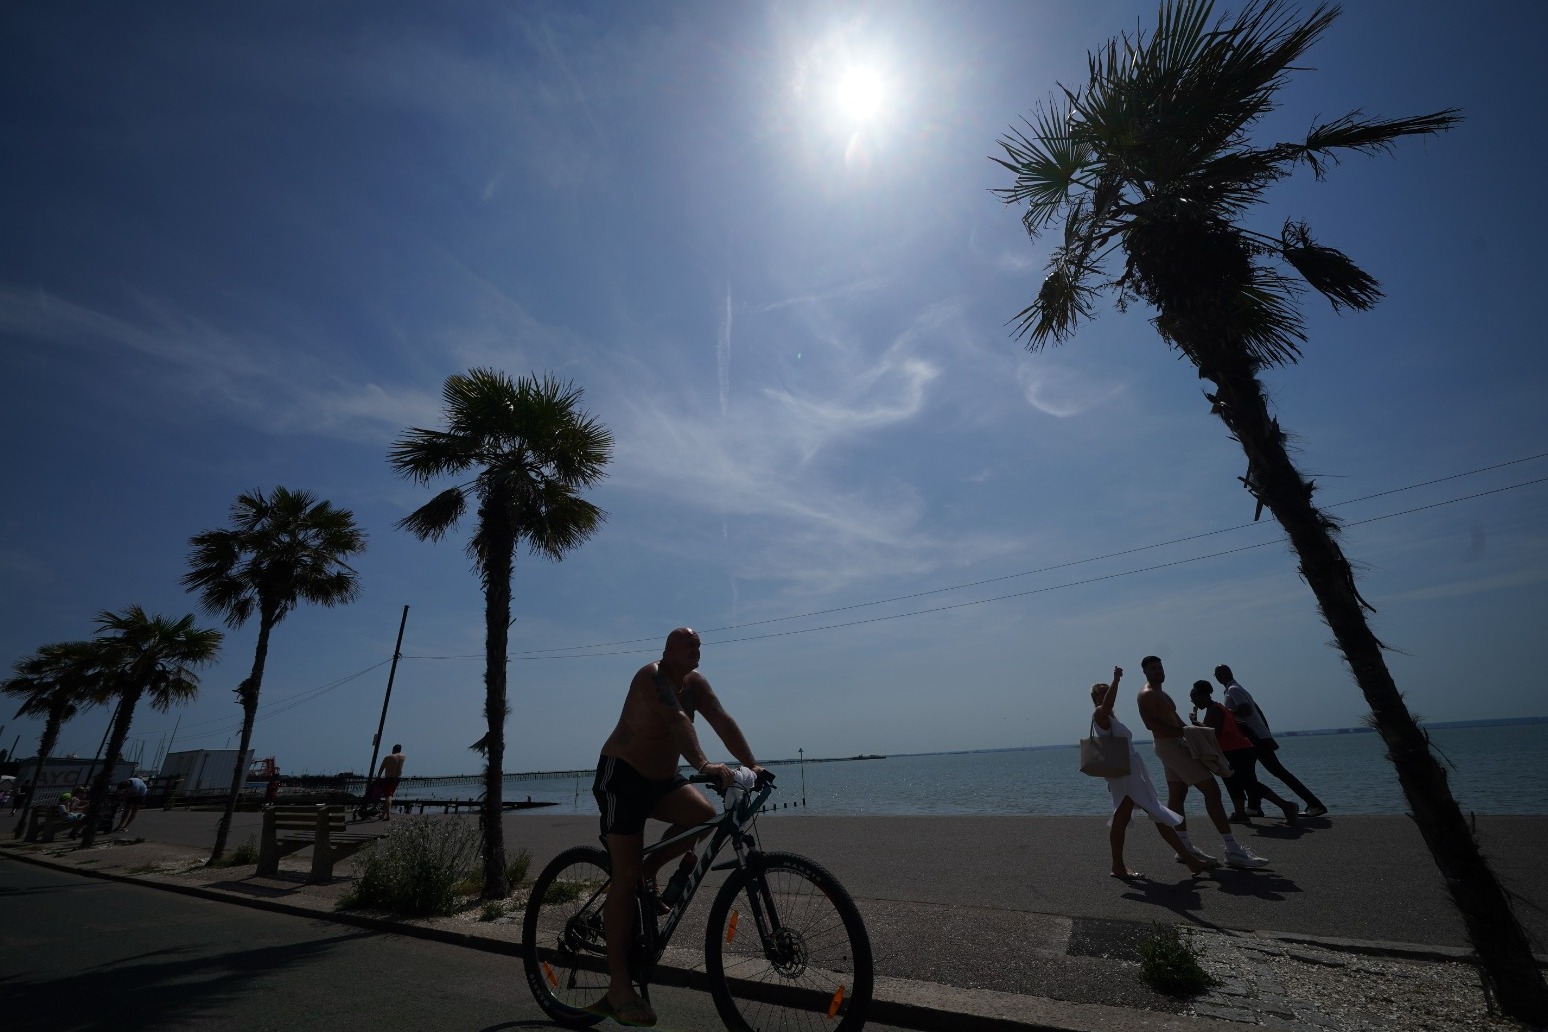 Warning over ‘ferocious heat’ as temperatures set to soar 